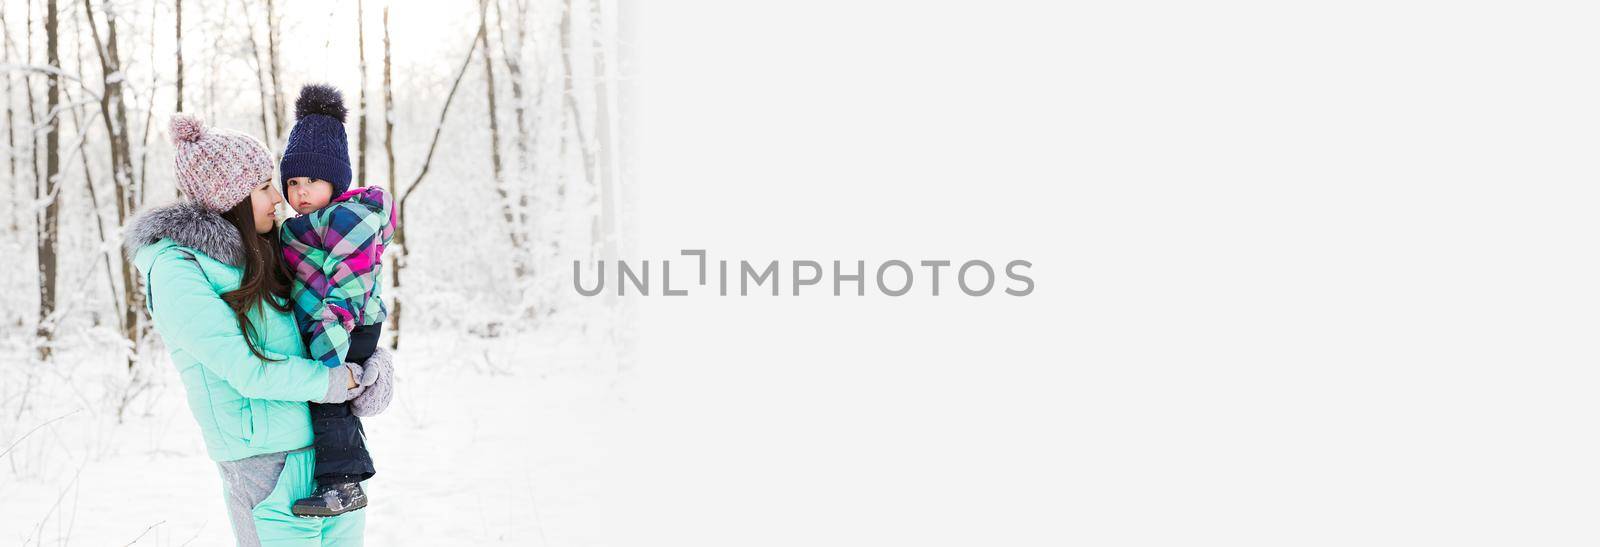 Banner happy family mother and child baby daughter on snow winter walk in woods copy space by Satura86